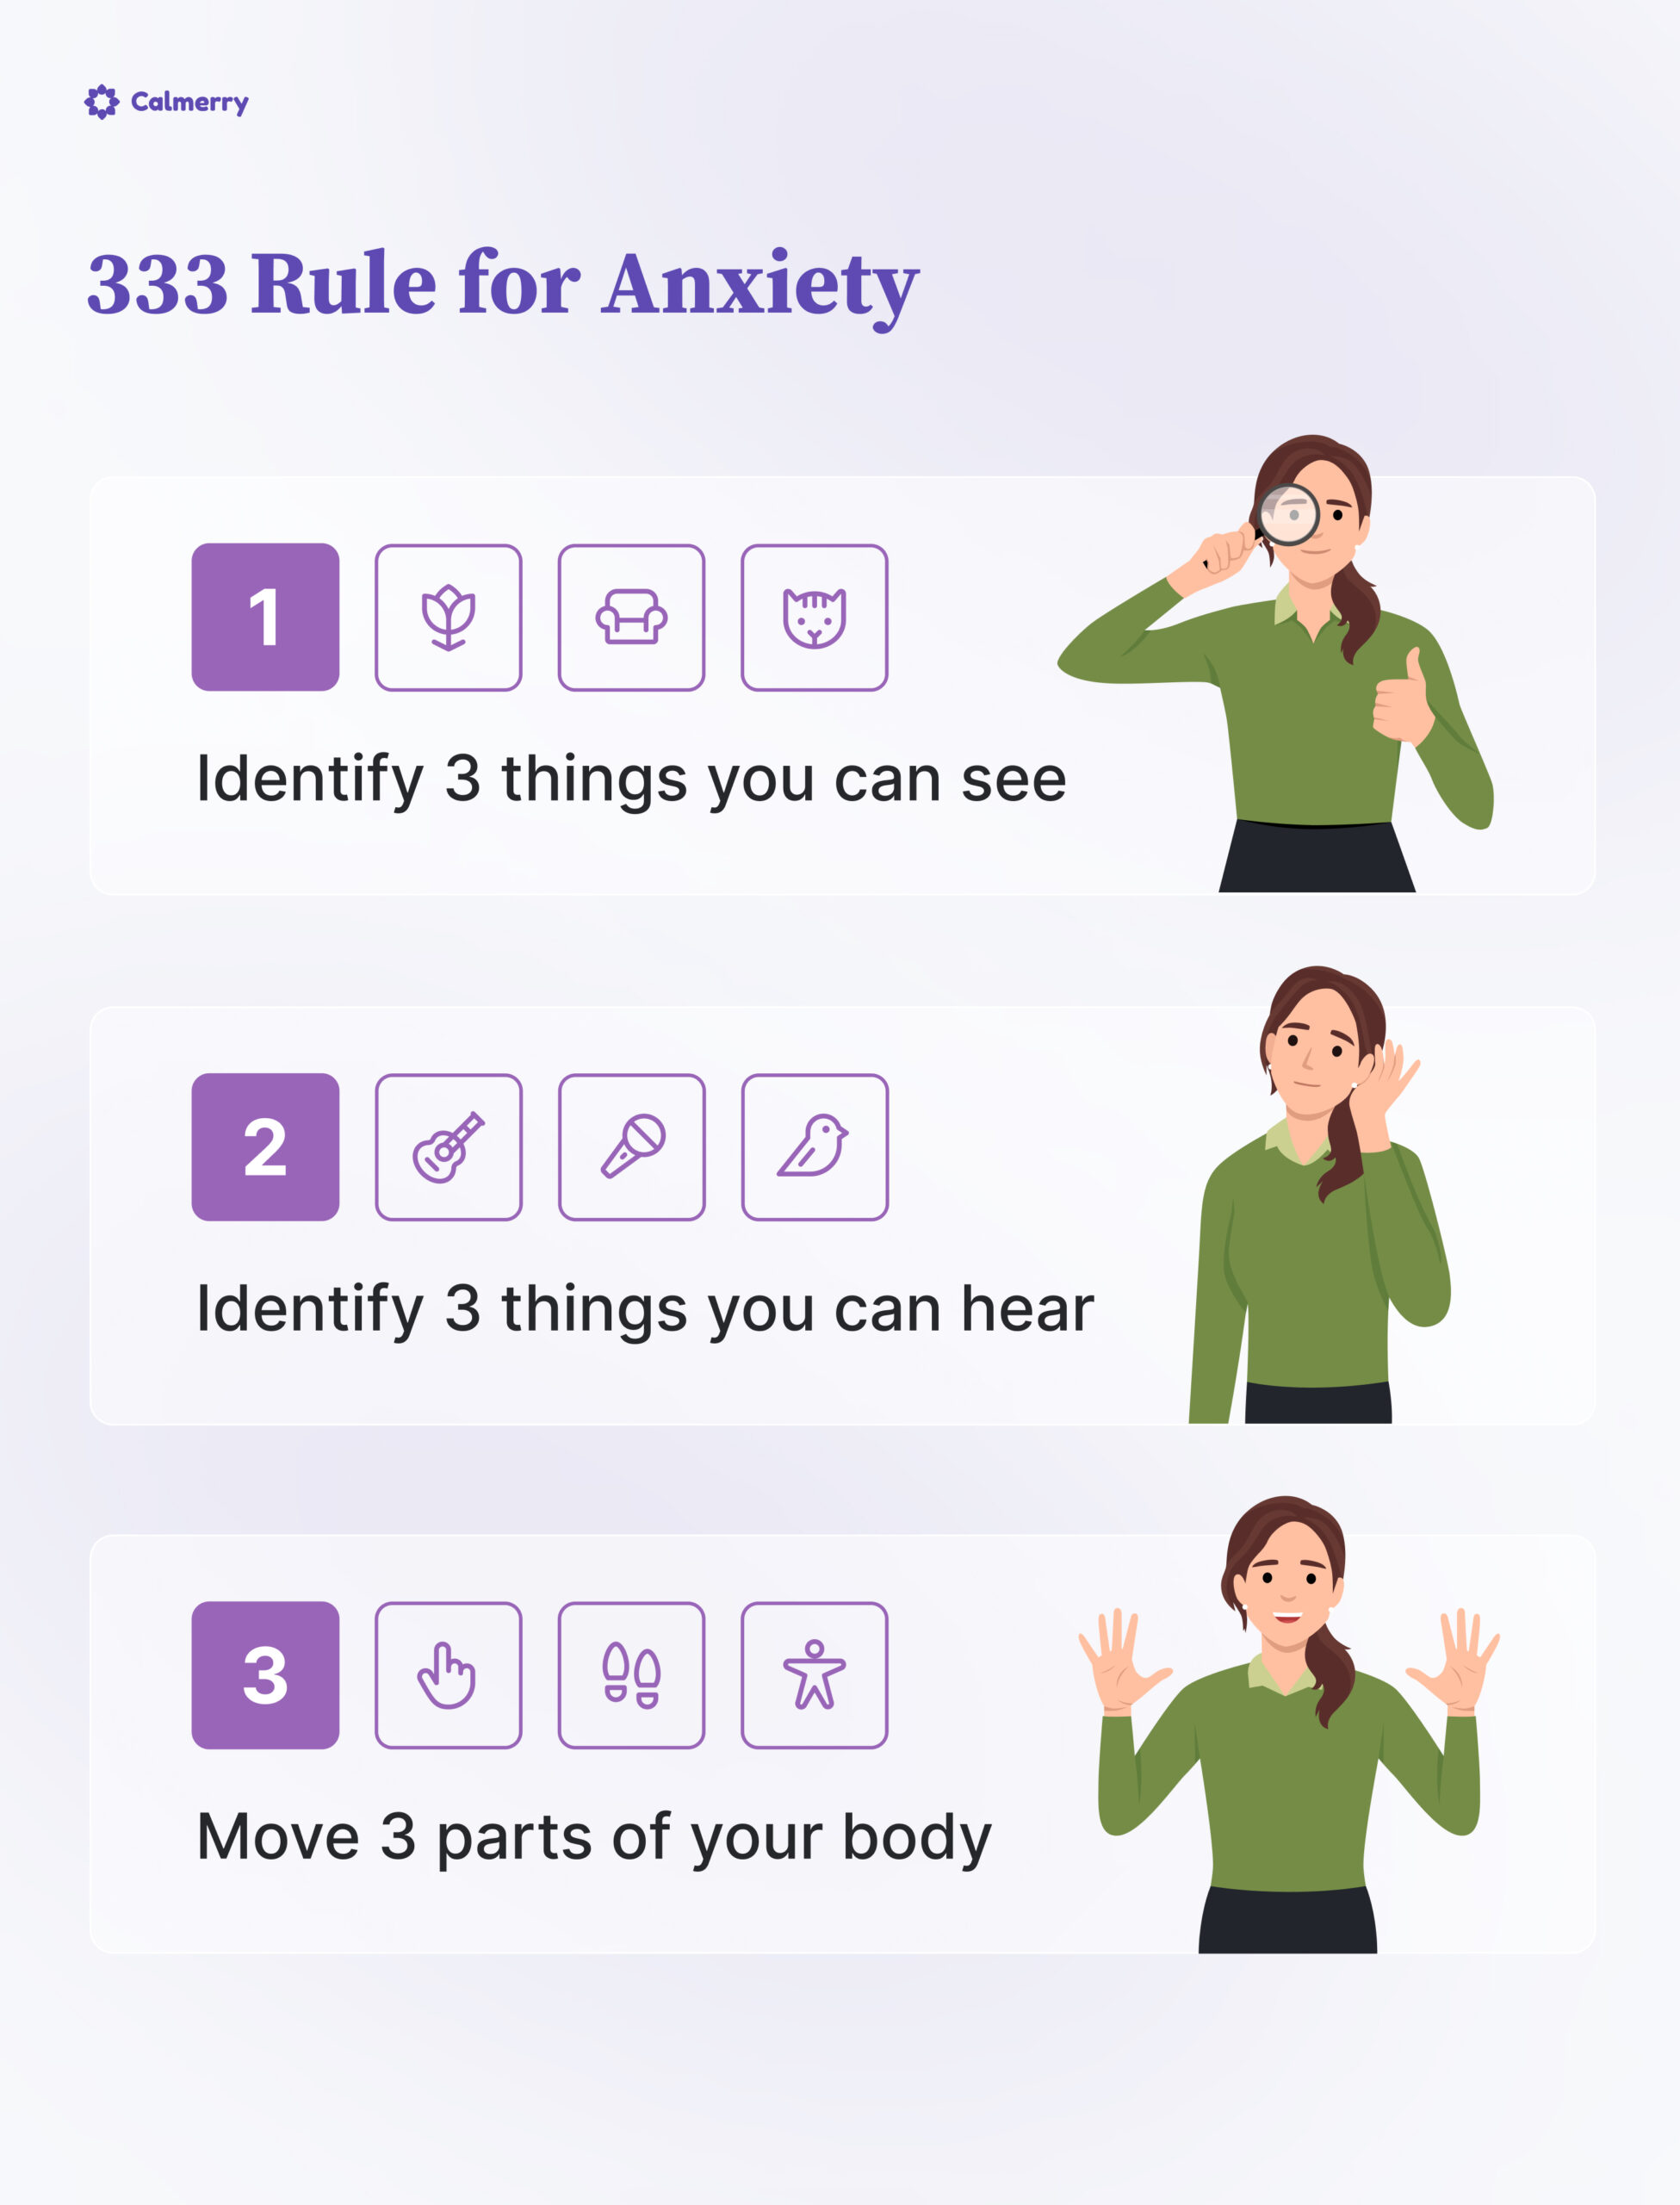 333 Rule for Anxiety
1. Identify 3 things you can see
2. Identify 3 things you can hear
3. Move 3 parts of your body
